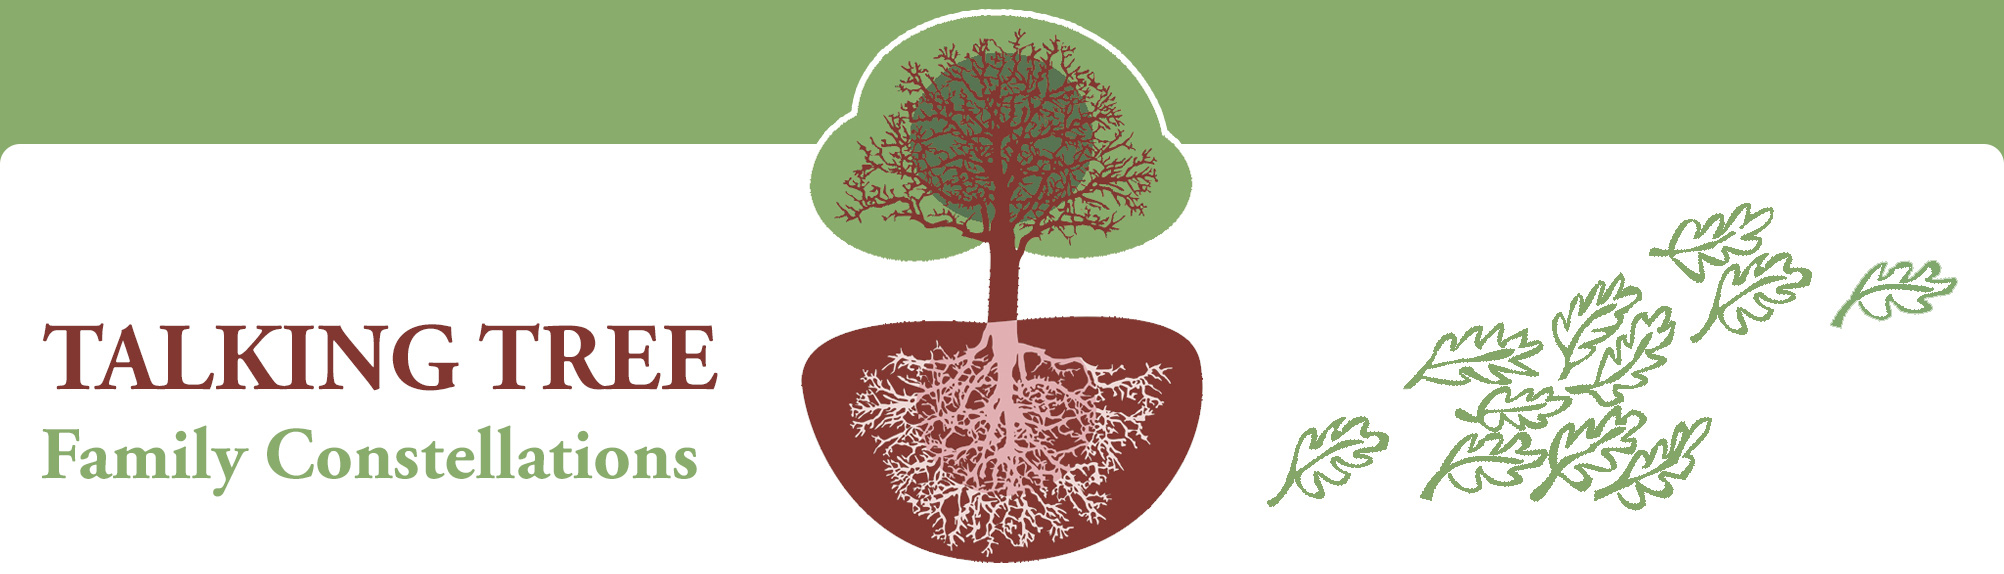 Family Constellations - How it works. Talking Tree